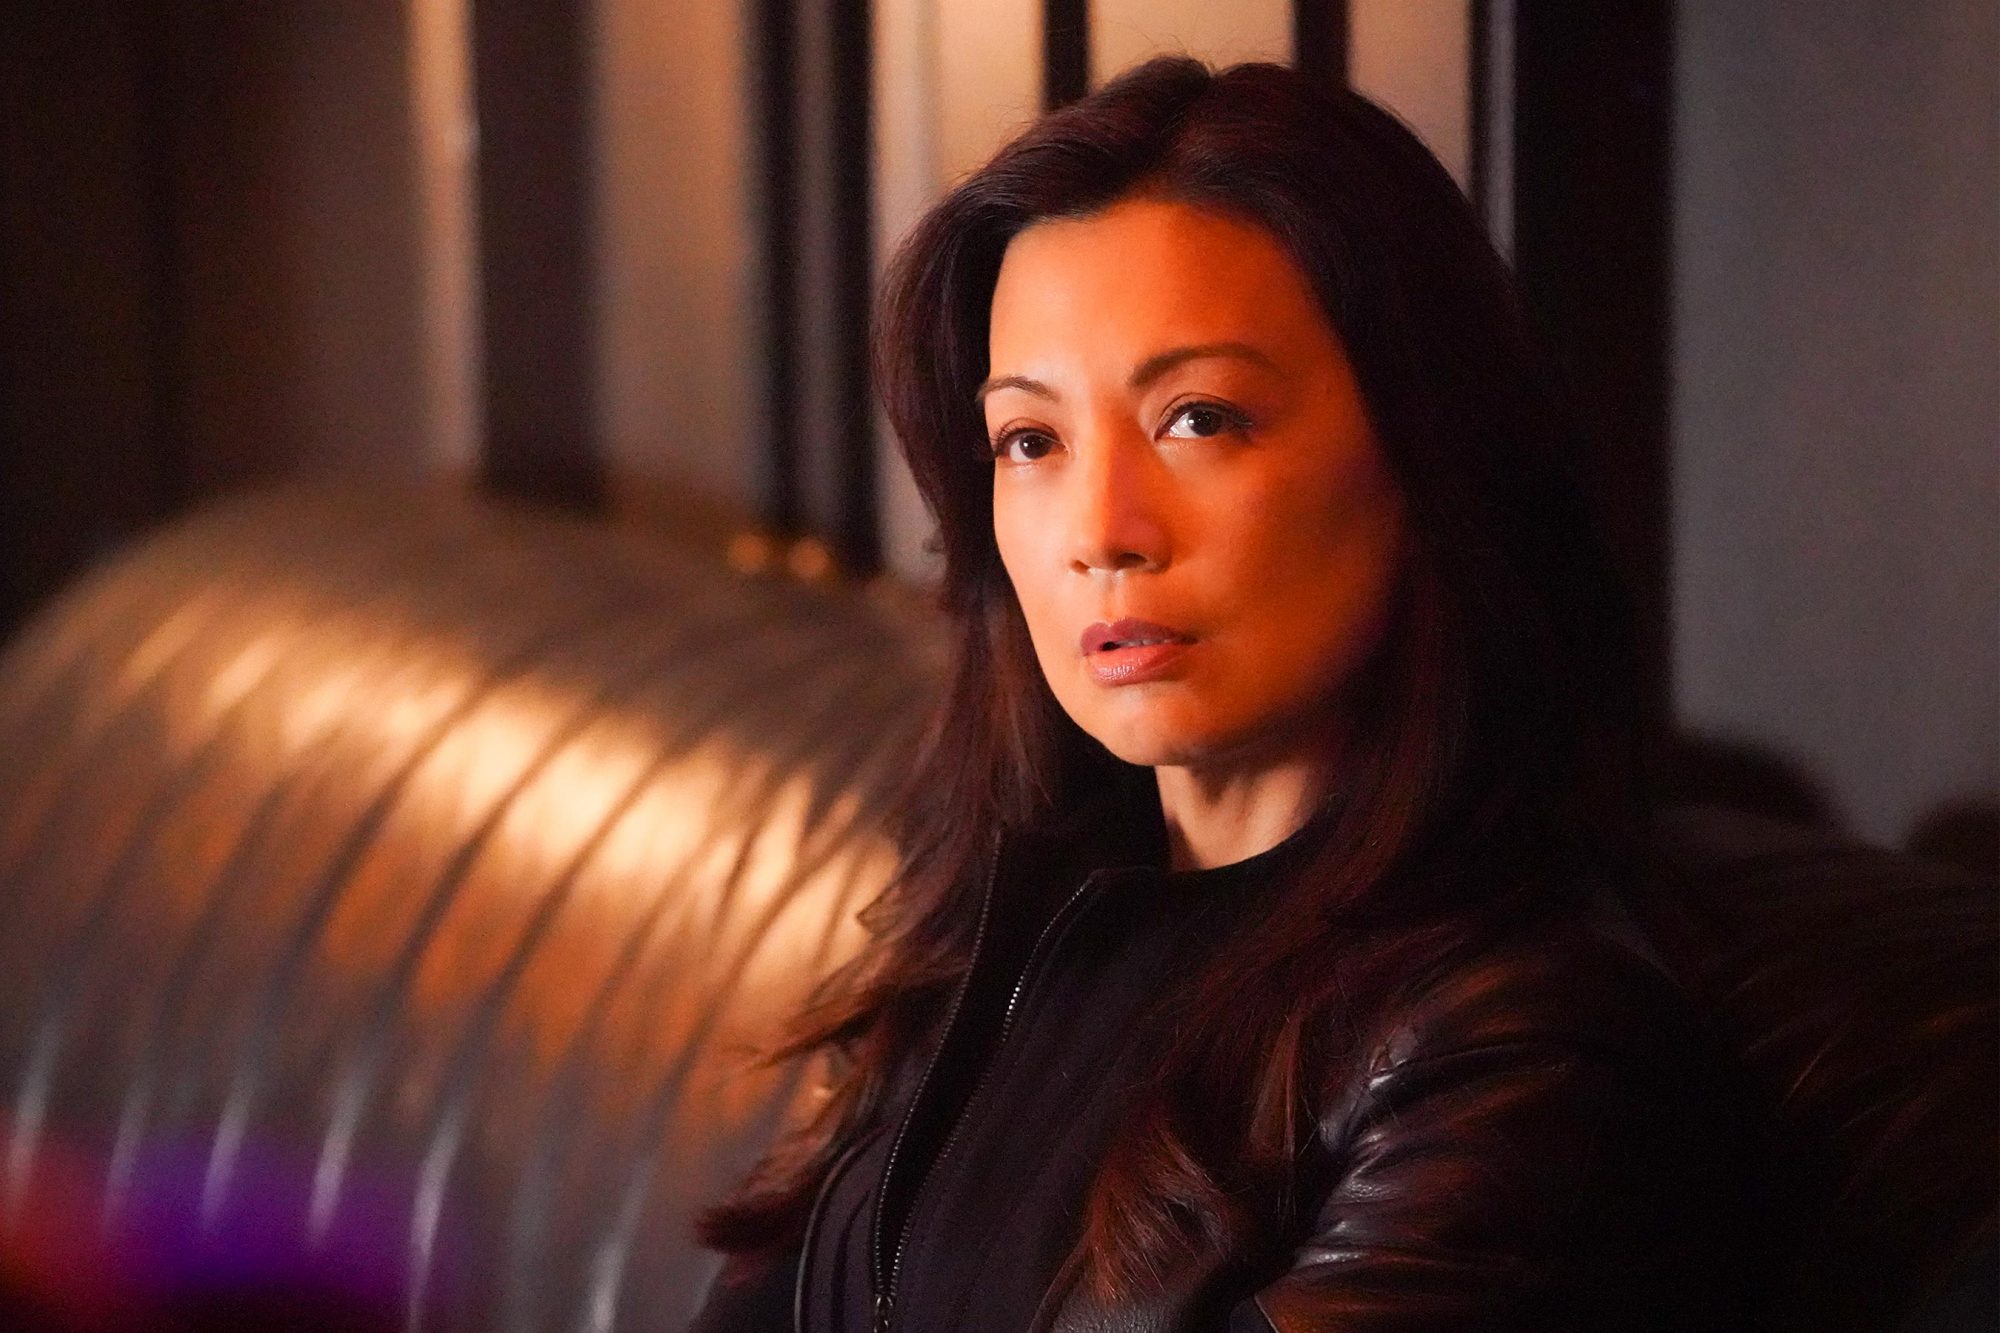 MARVEL'S AGENTS OF S.H.I.E.L.D. - "The Other Thing" - Sarge has May; Altarah has Daisy, Enoch and Simmons; and now, there are two planets that need saving, on "Marvel's Agents of S.H.I.E.L.D.," airing FRIDAY, JUNE 14 (8:00-9:00 p.m. EDT), on The ABC Television Network. (ABC/Mitch Haaseth) MING-NA WEN